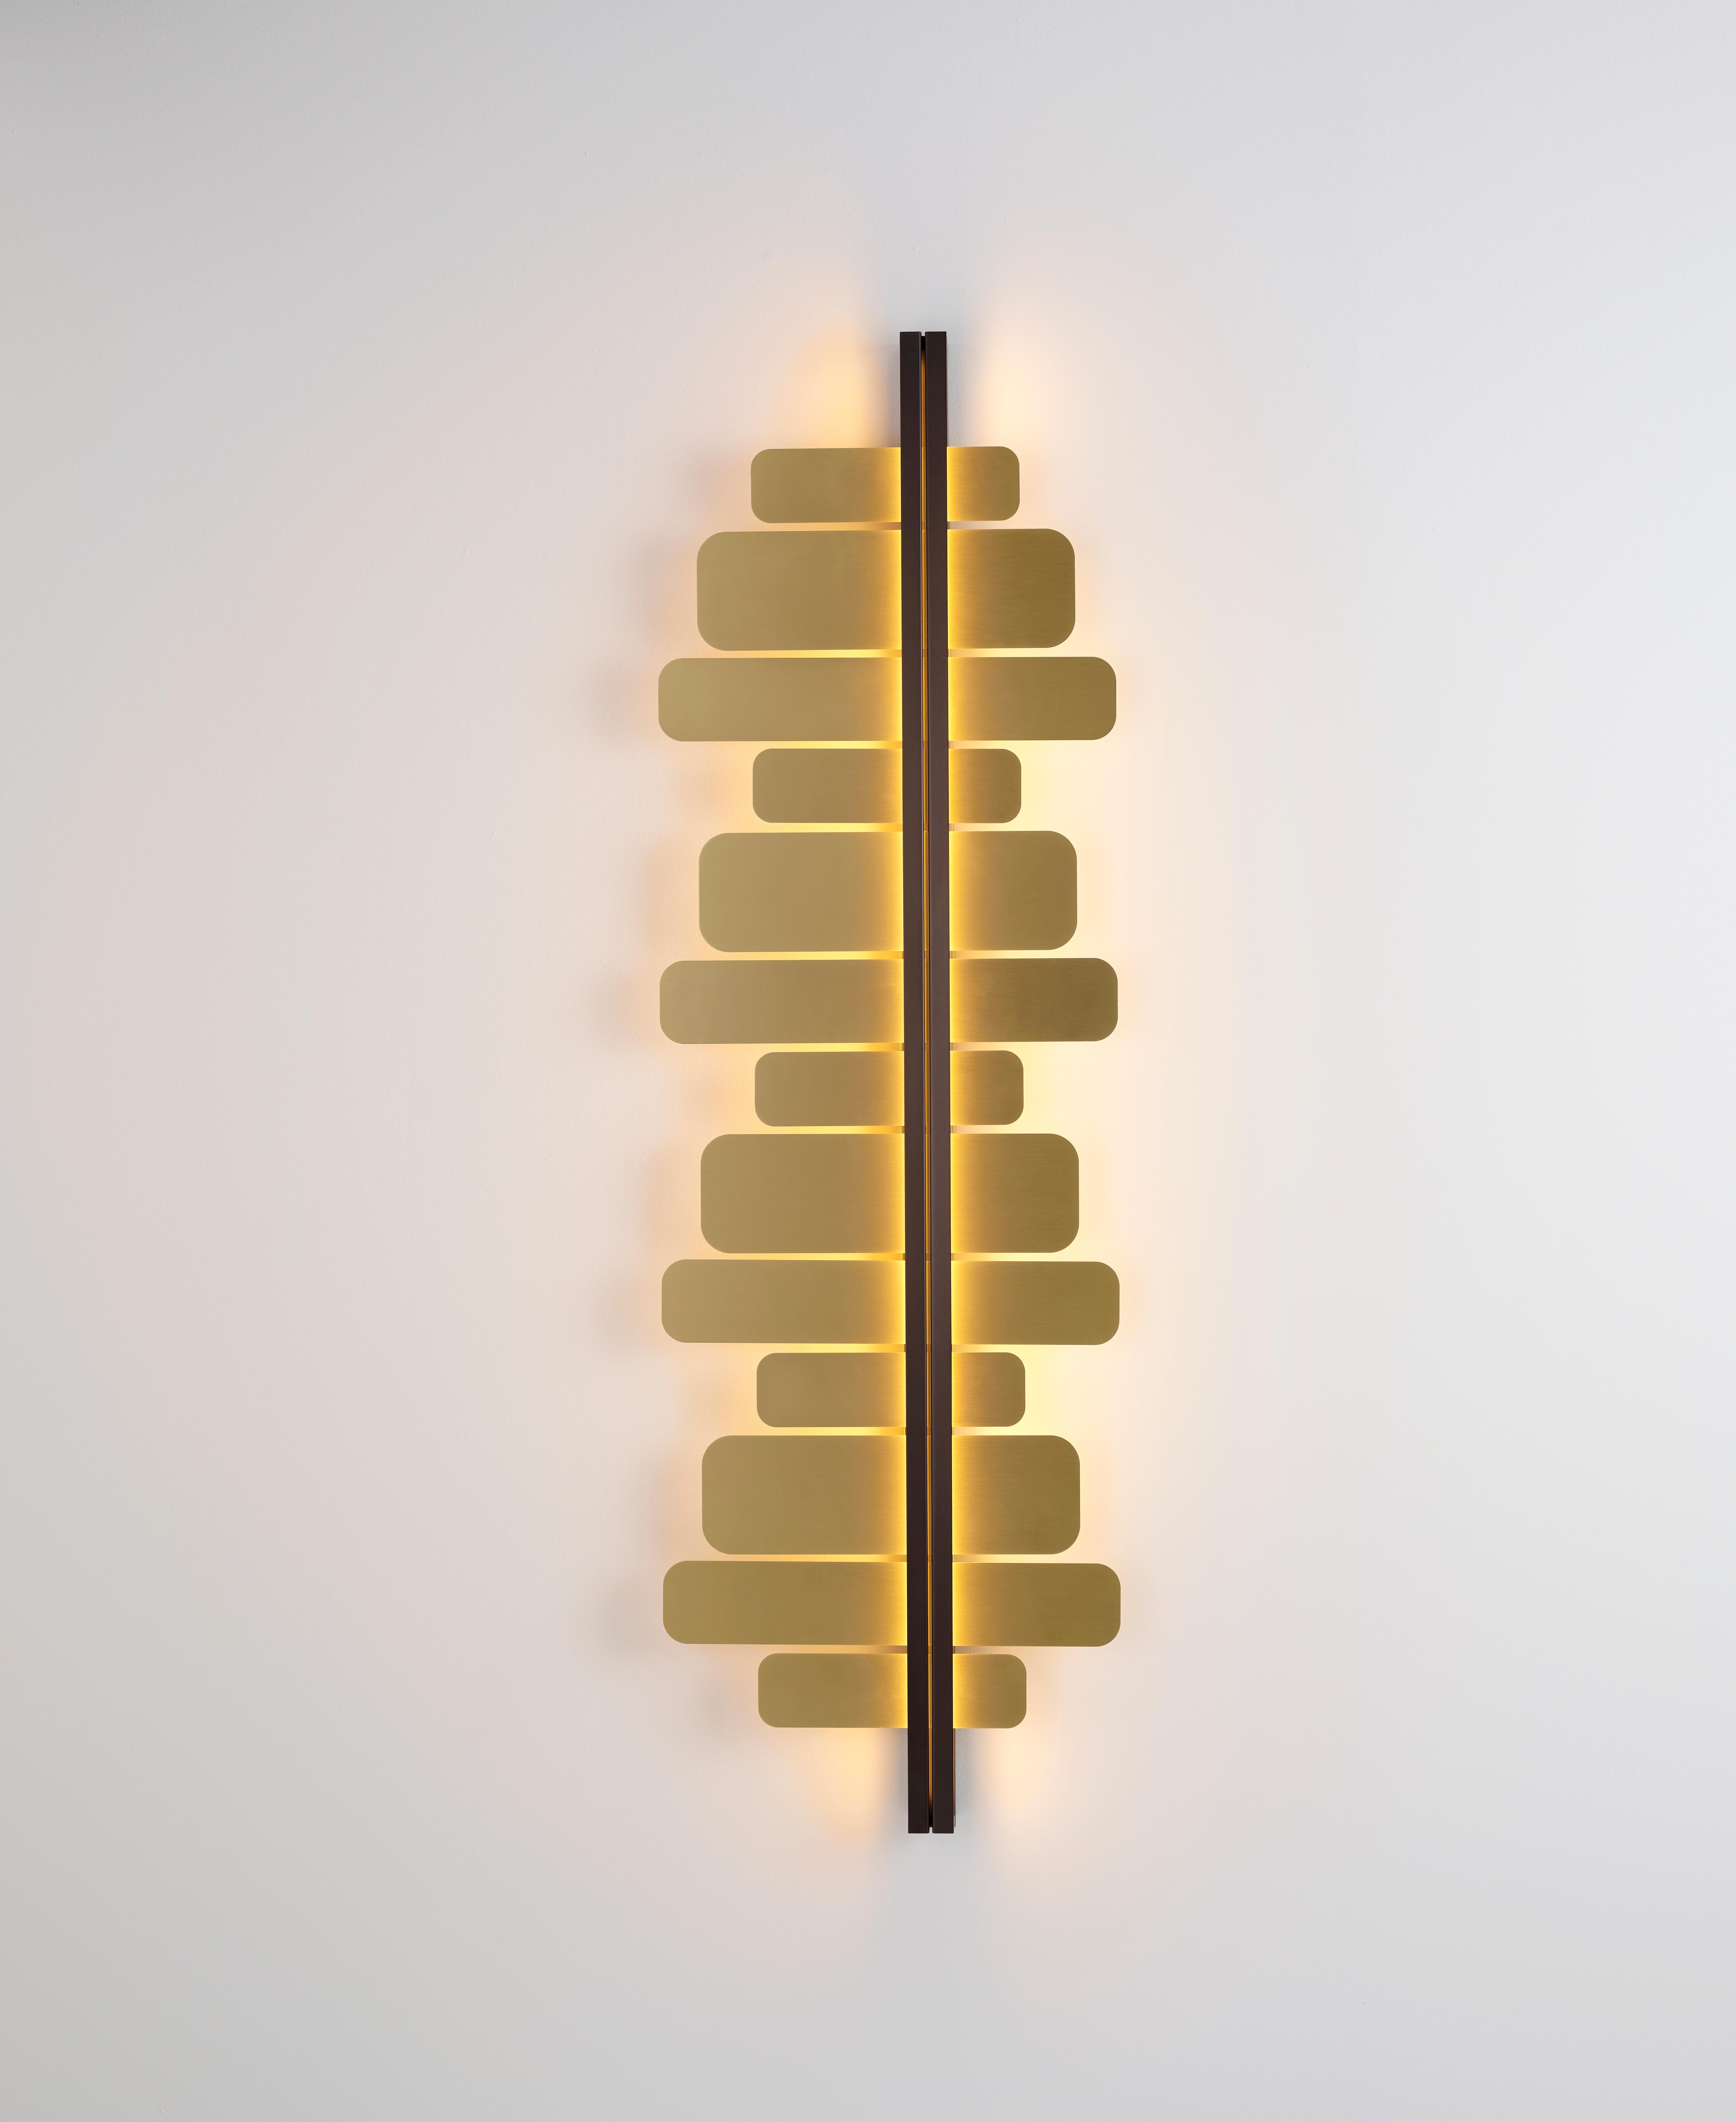 Strate score wall light by Emilie Cathelineau
Dimensions: W 46.2 x D 8.7 x H 150 cm
Materials: solid brass, polycarbonate diffuser.
Others finishes and dimensions are available.

All our lamps can be wired according to each country. If sold to